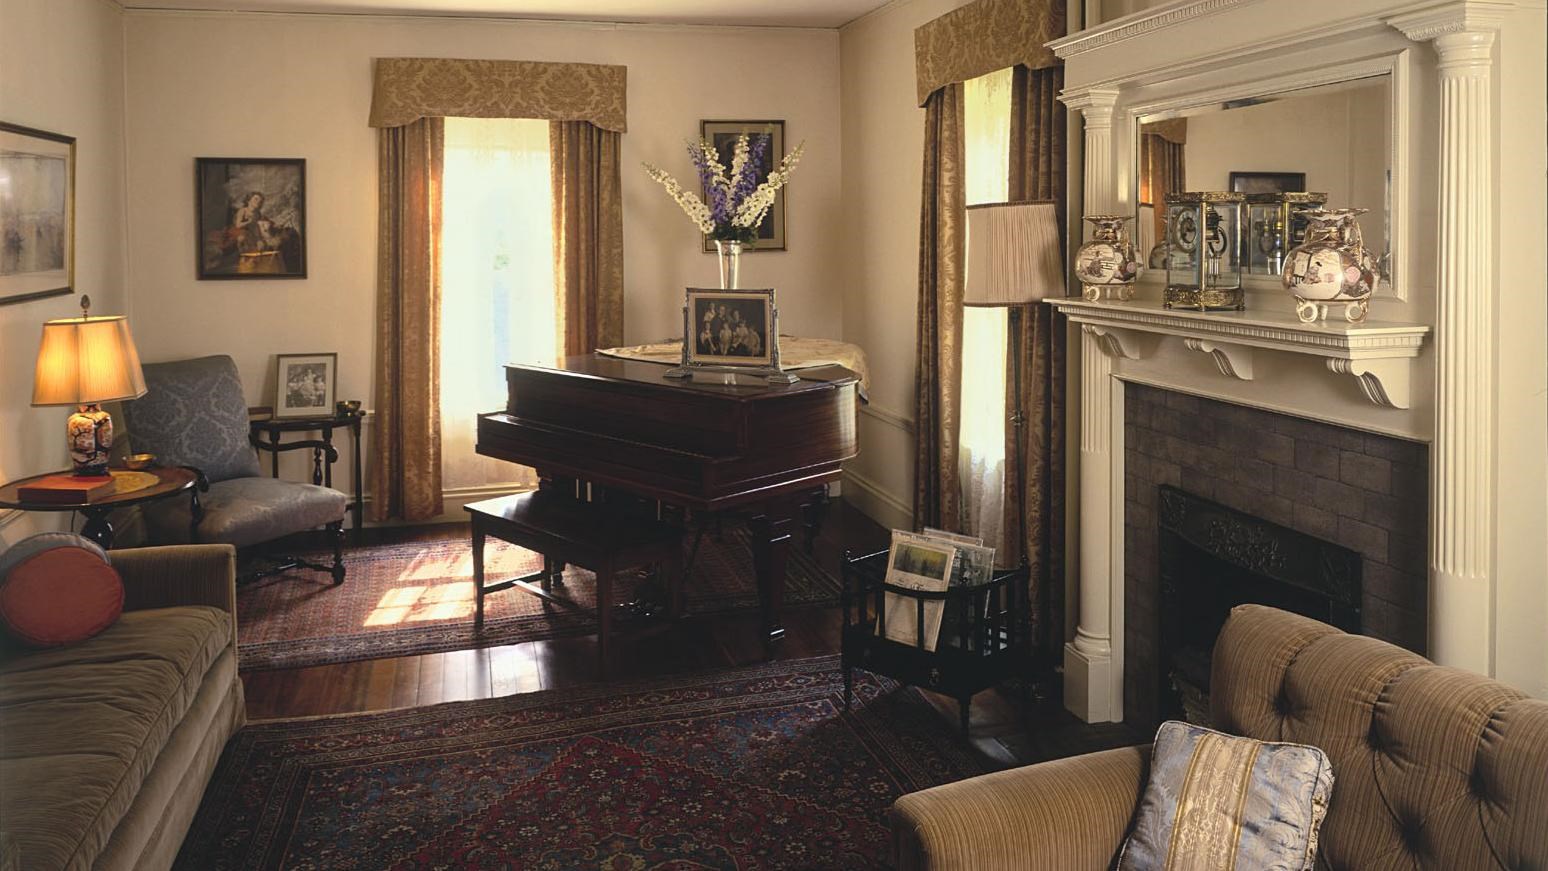 Long room with sofa and plush chairs arranged around tall mantle. Baby grand piano at back of room.